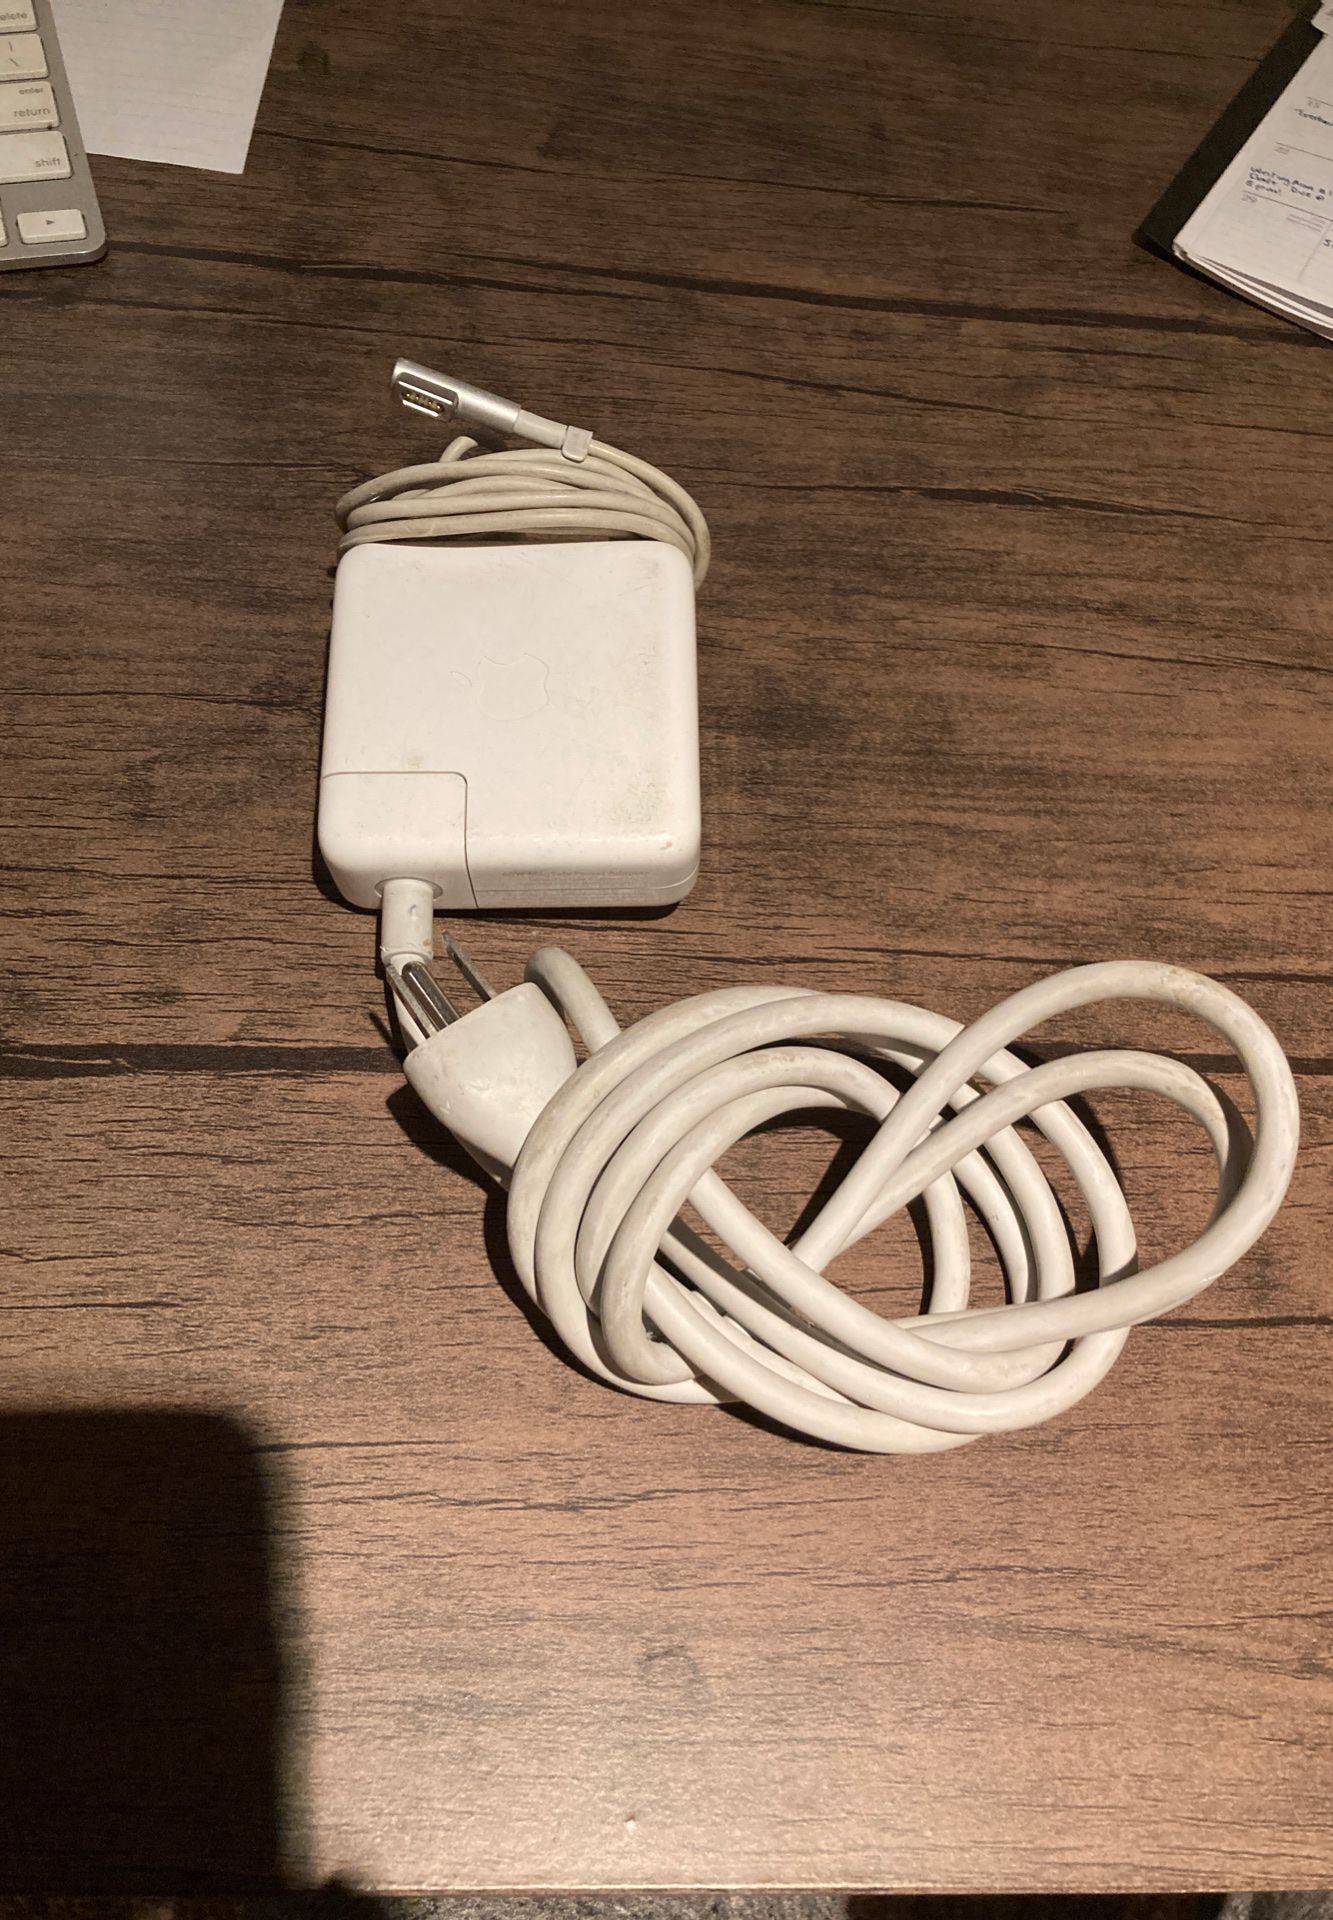 MacBook Pro 06-16 Charger